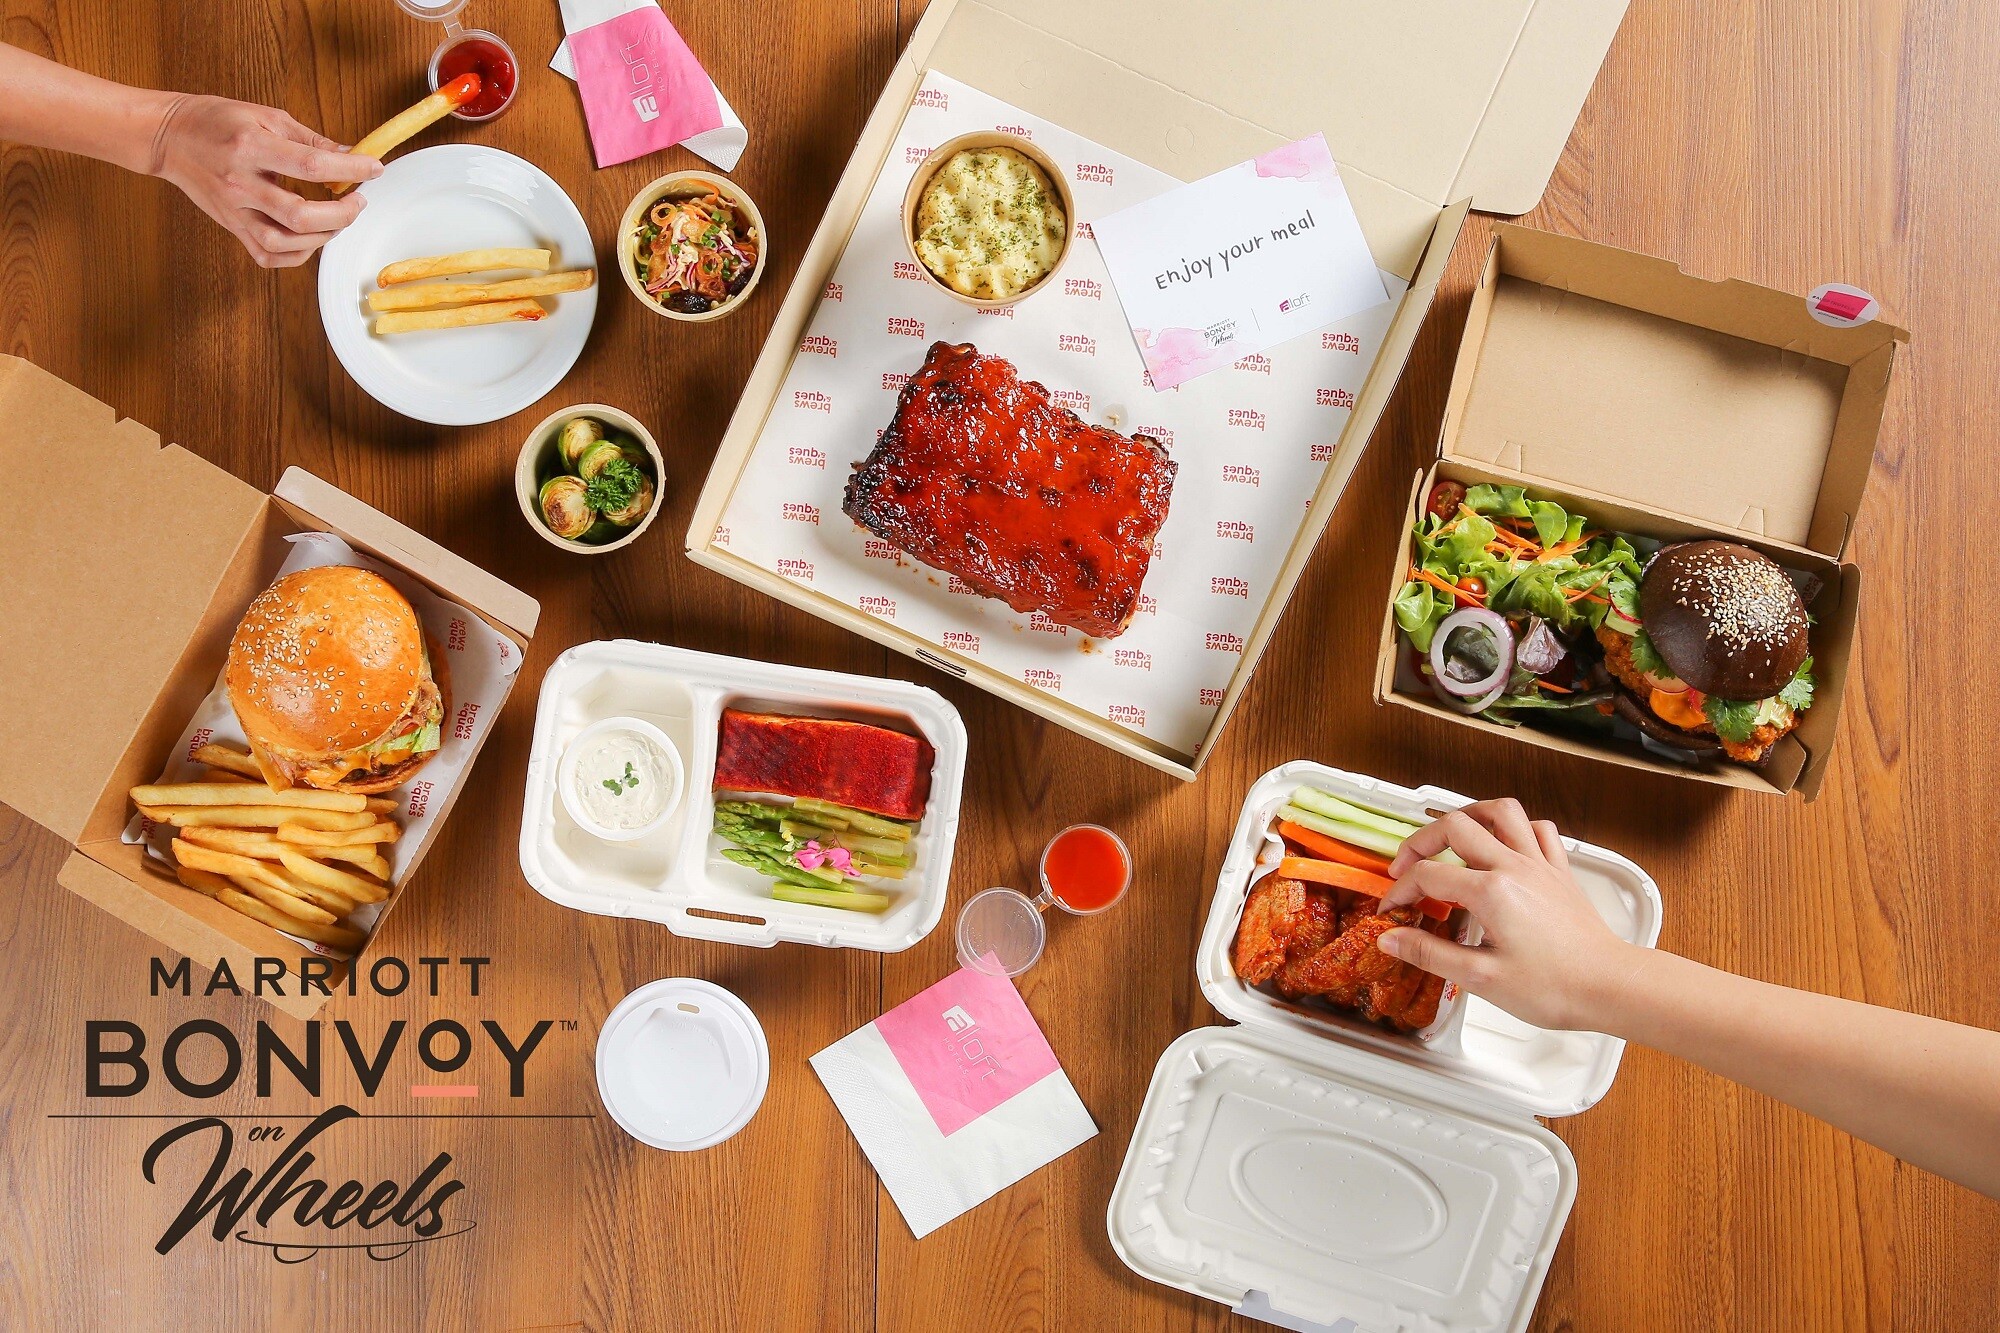 Aloft Bangkok's specialty restaurants Re:fuel by Aloft and brews & 'ques by Crave Join Bangkok's latest food delivery and takeaway service, Marriott Bonvoy On Wheels Thailand